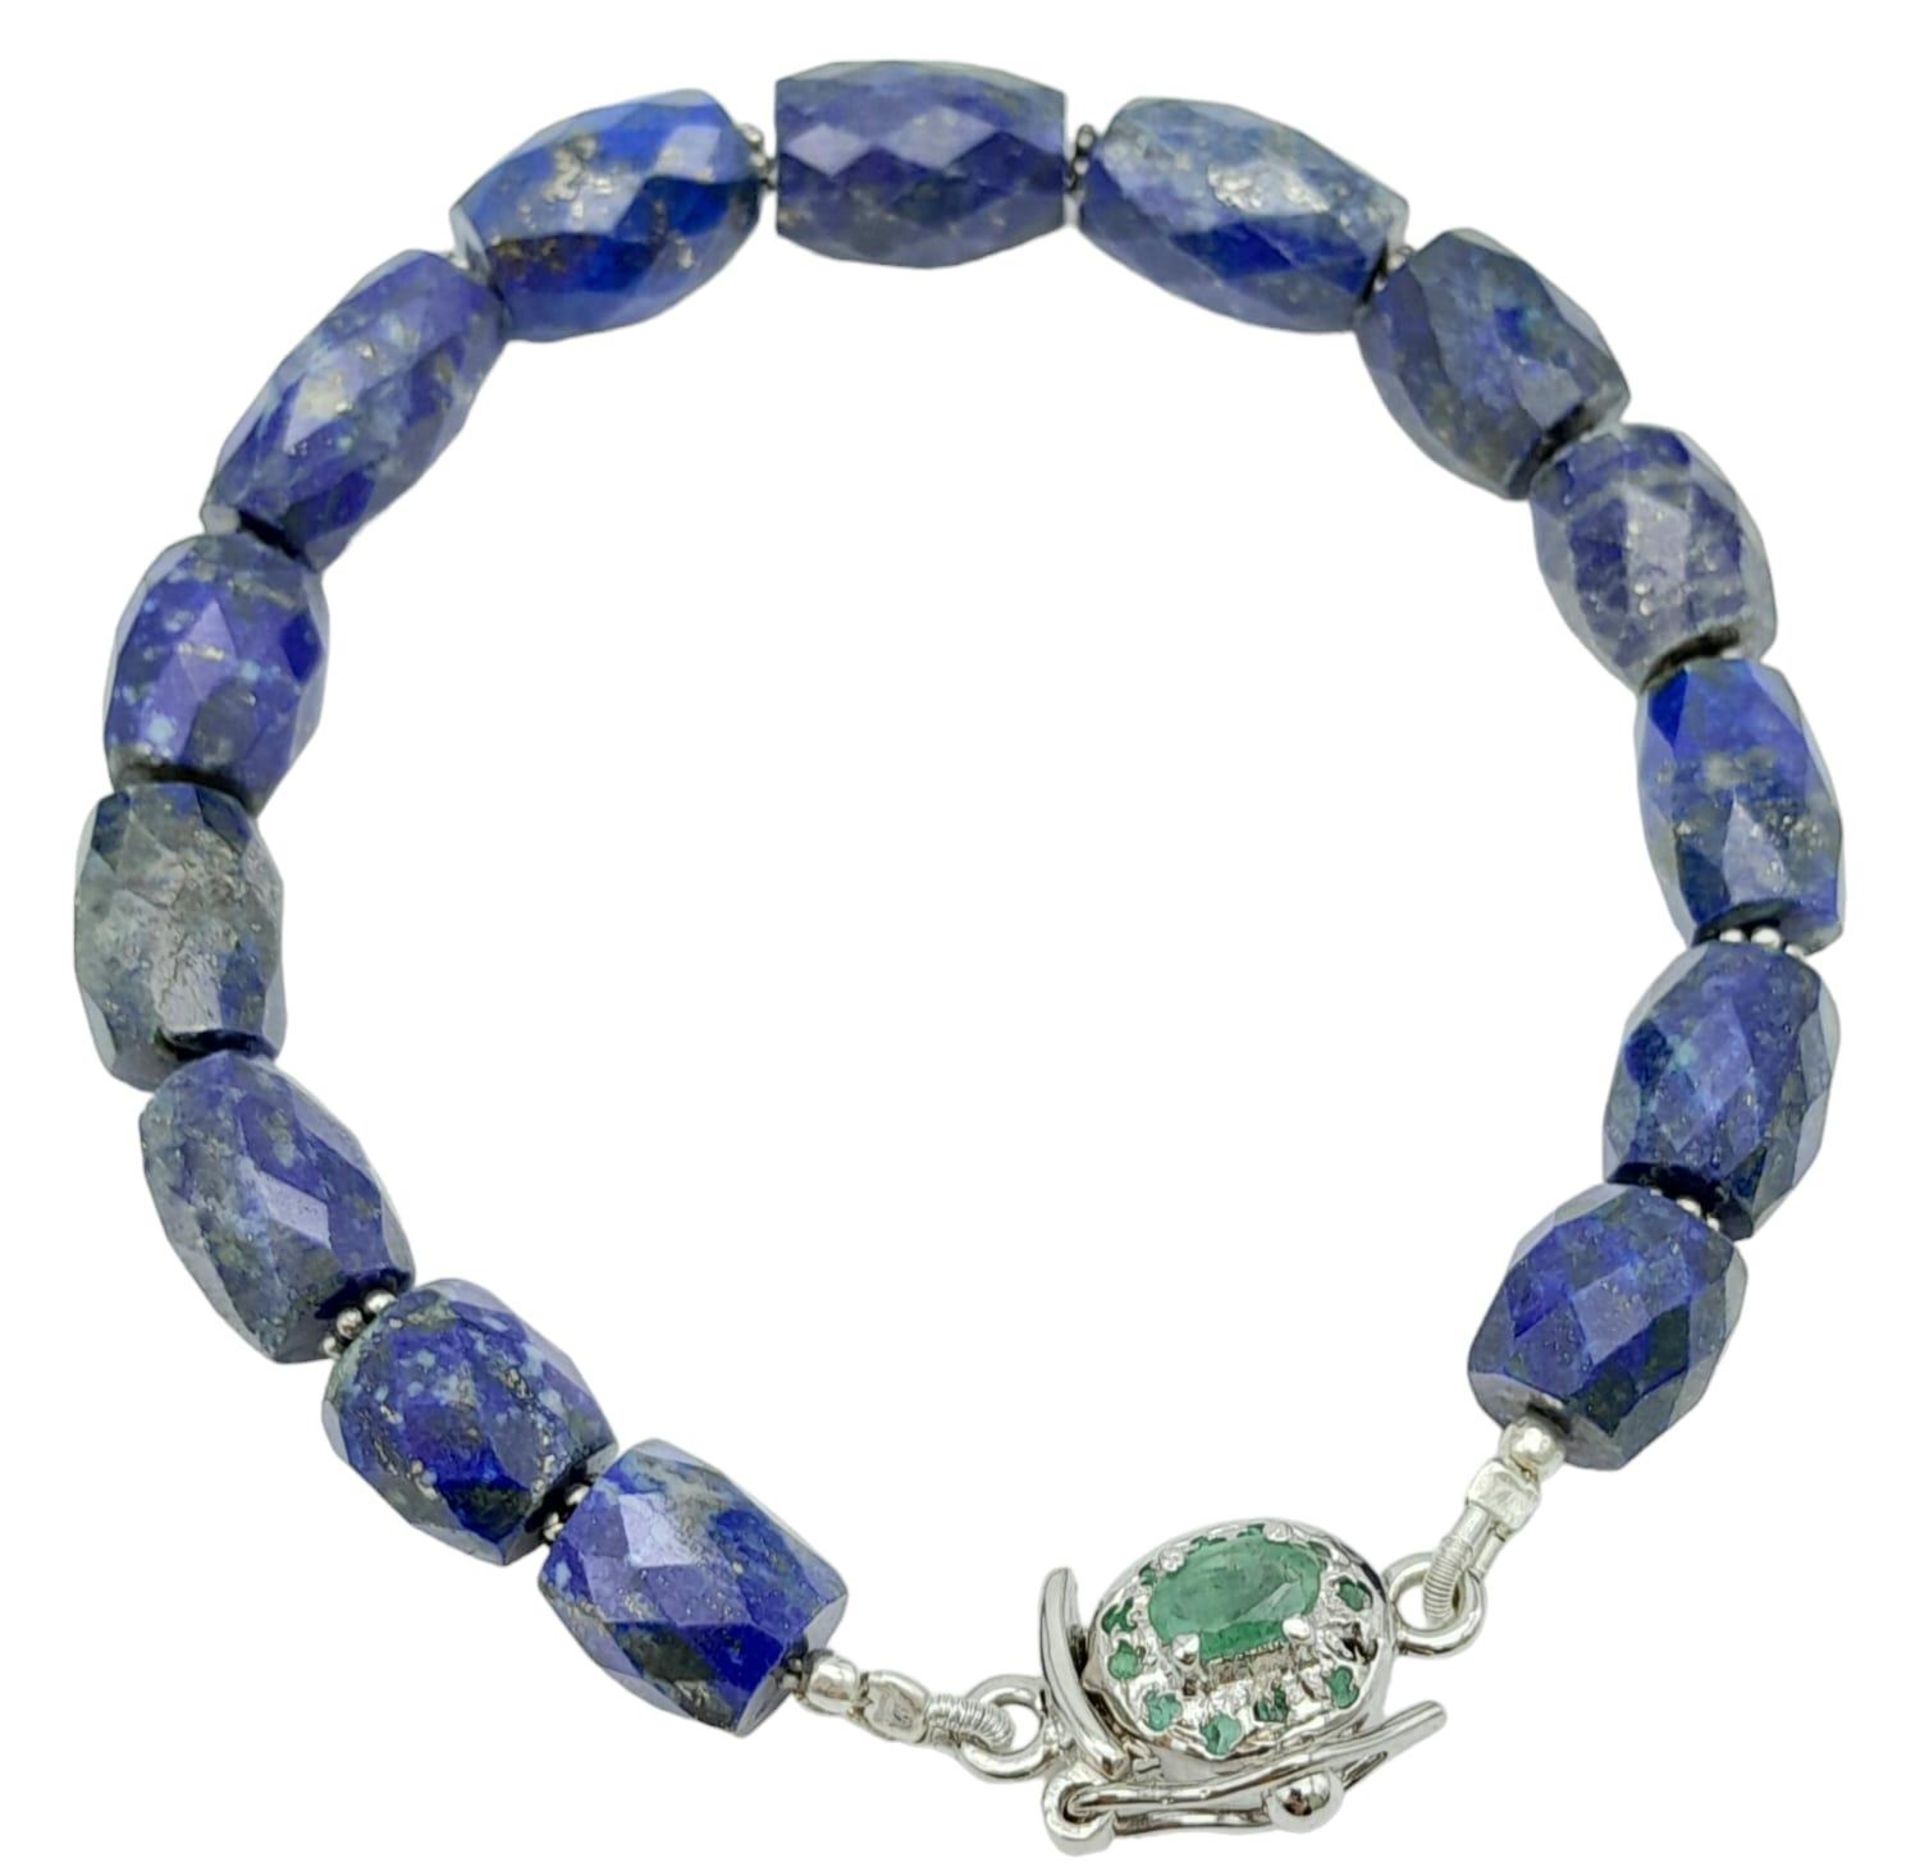 A Lapis Lazuli Bracelet with Emerald and 925 Silver Clasp. 110ctw. 20.5cm length, 22.57g total